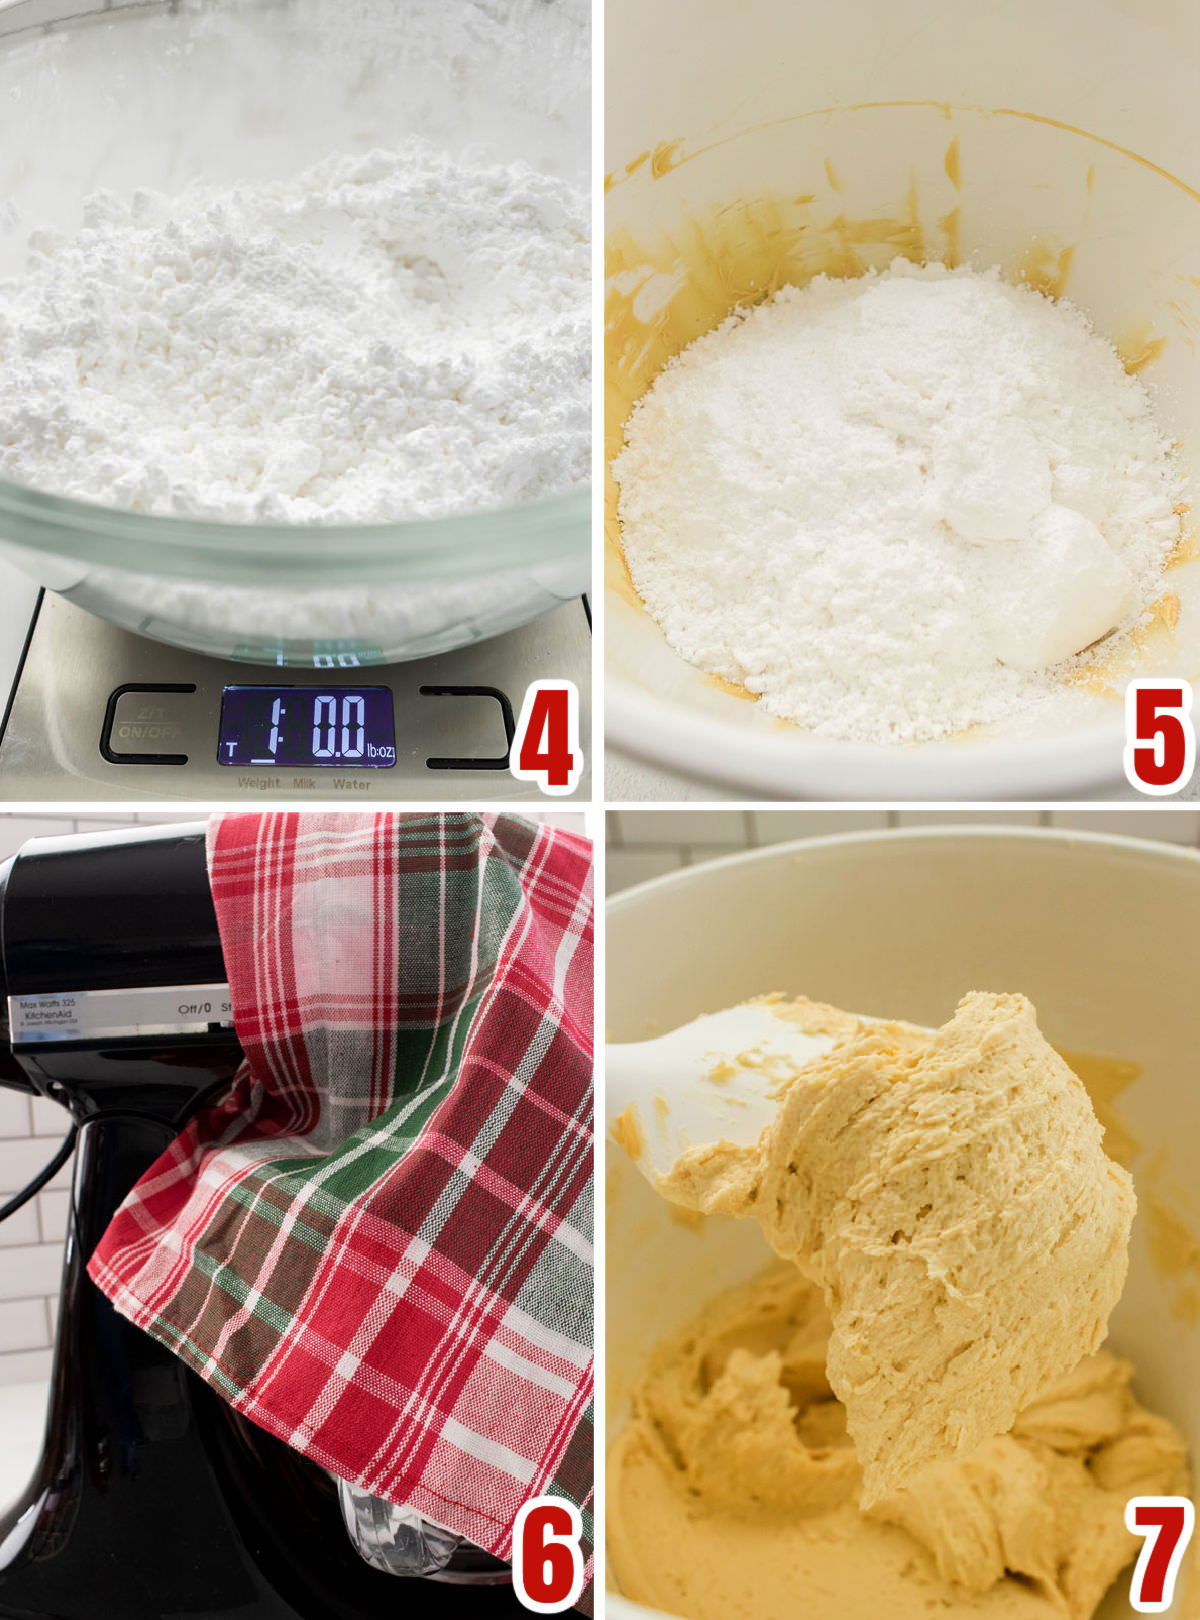 Collage image showing the steps for adding the powdered sugar to the frosting mixture.